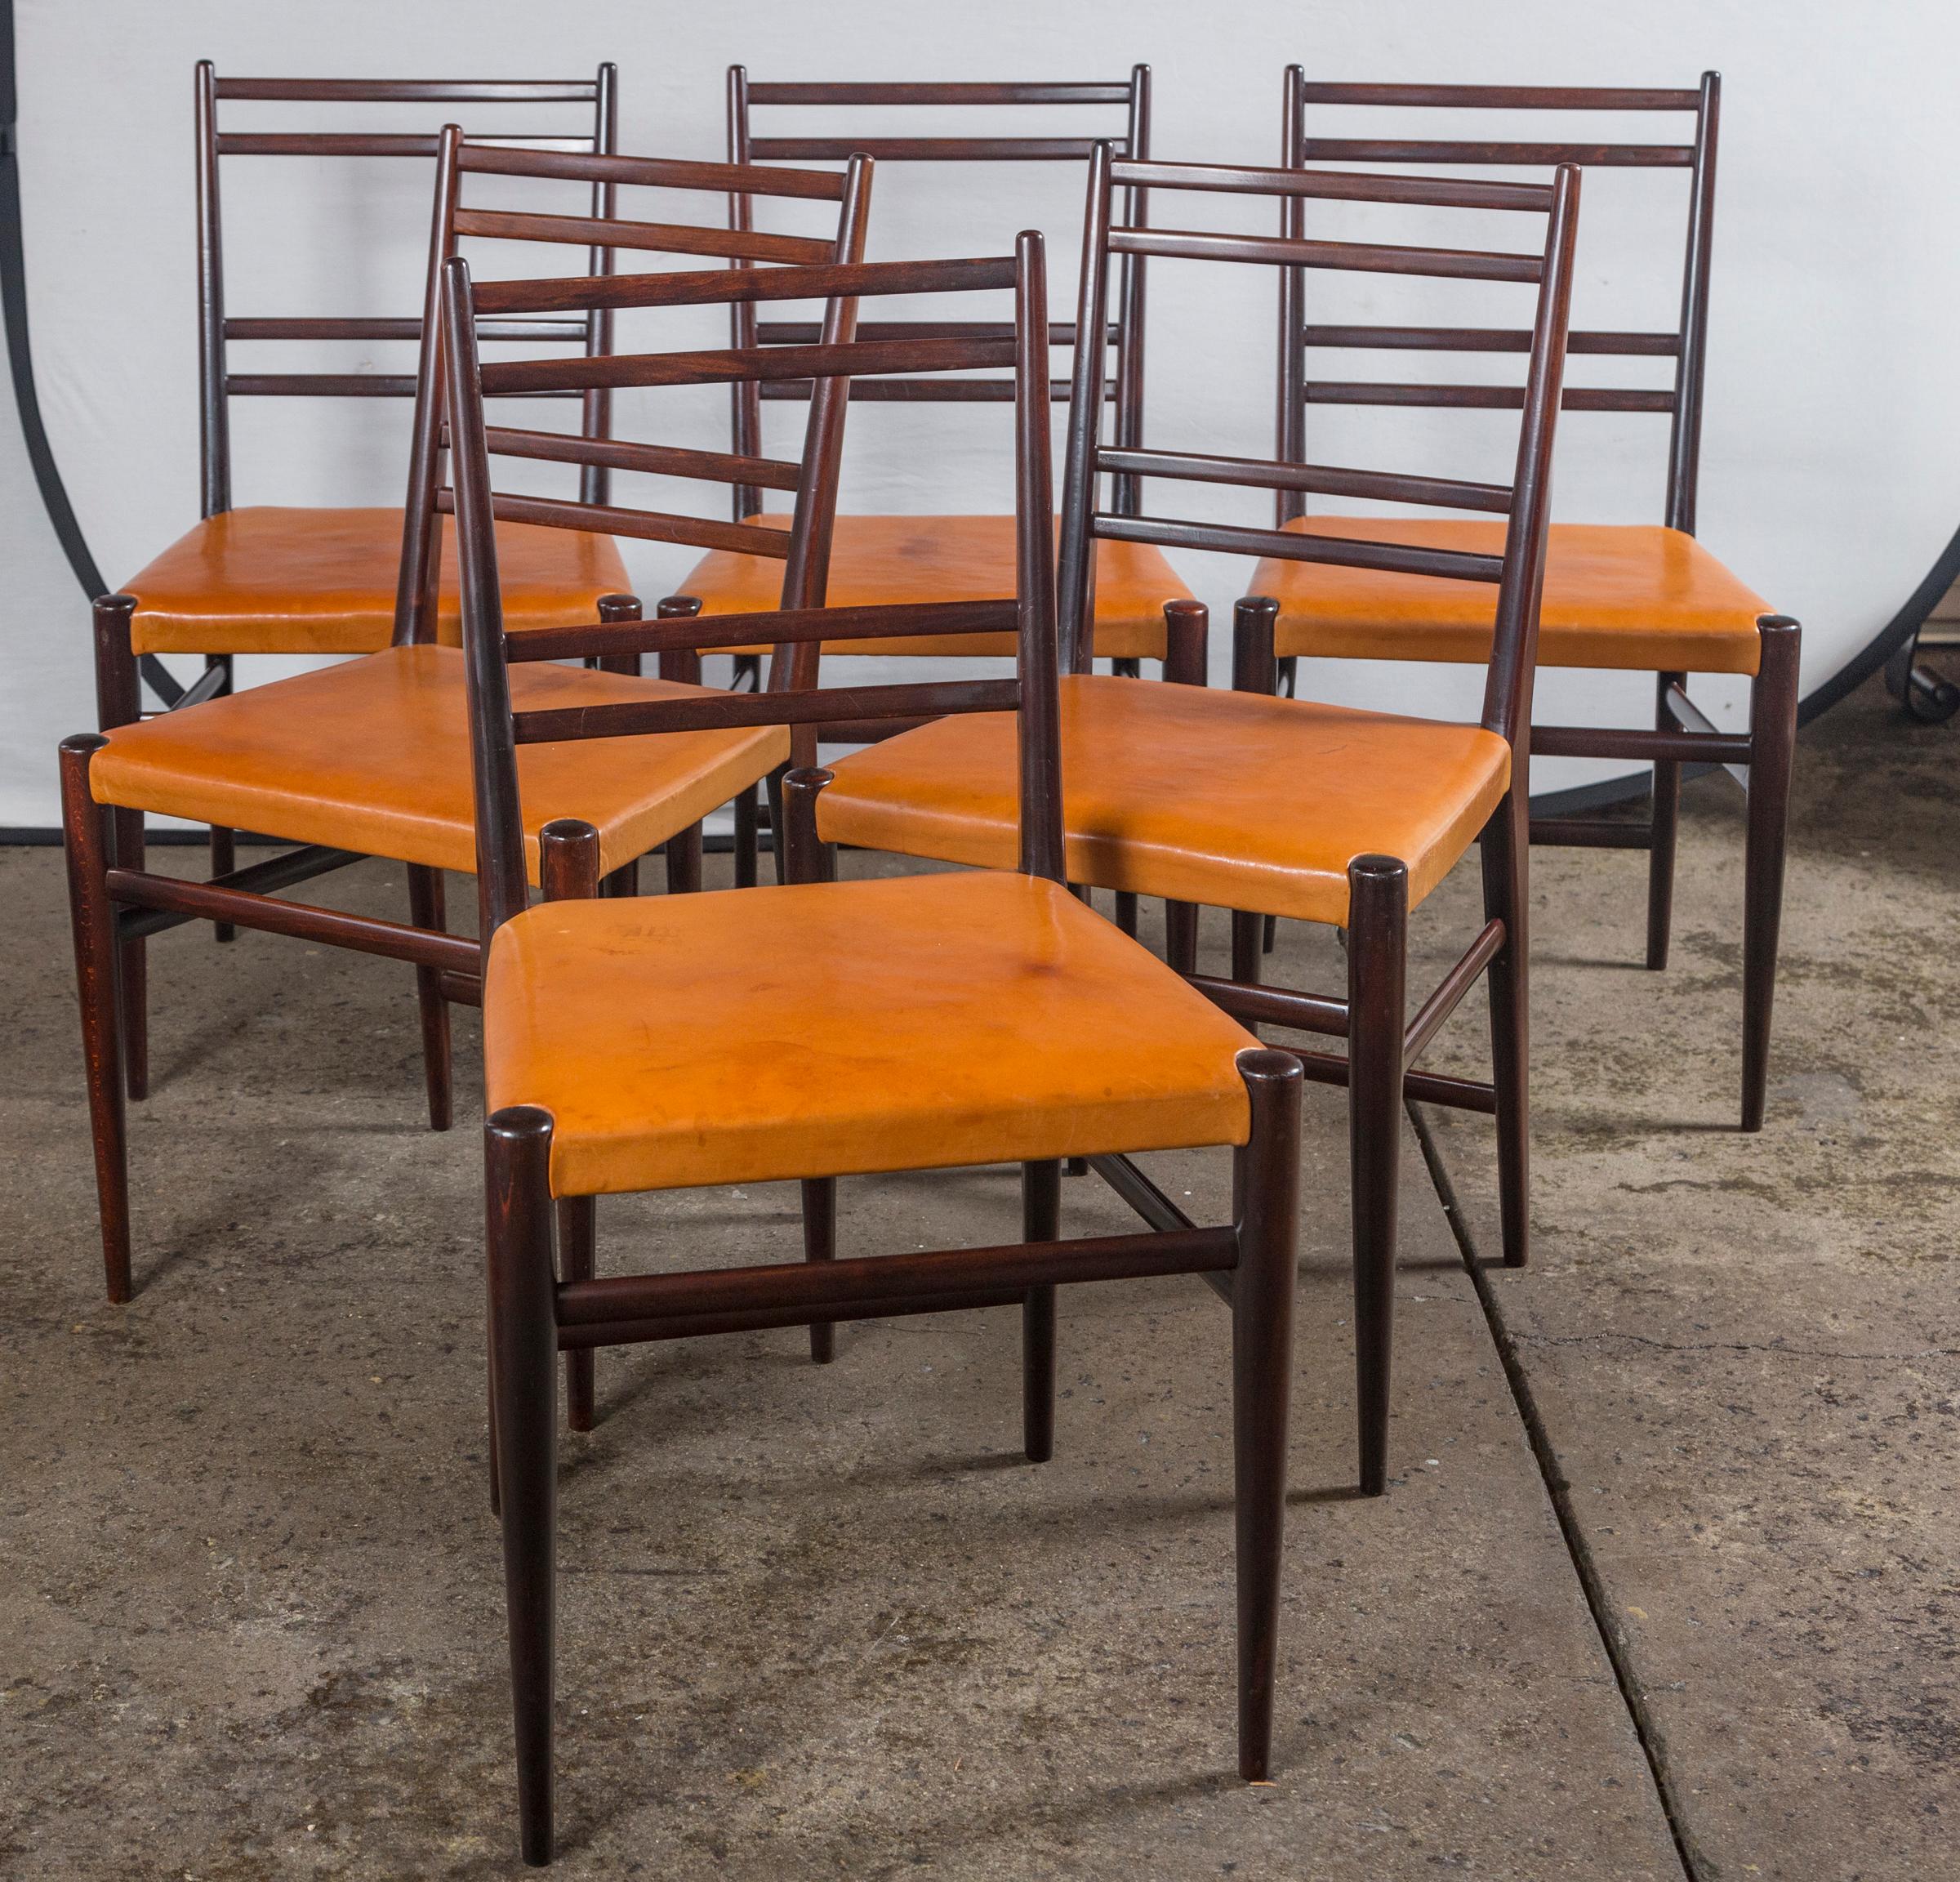 Swedish mid-century brown leather and wood dining chairs, set of 6.